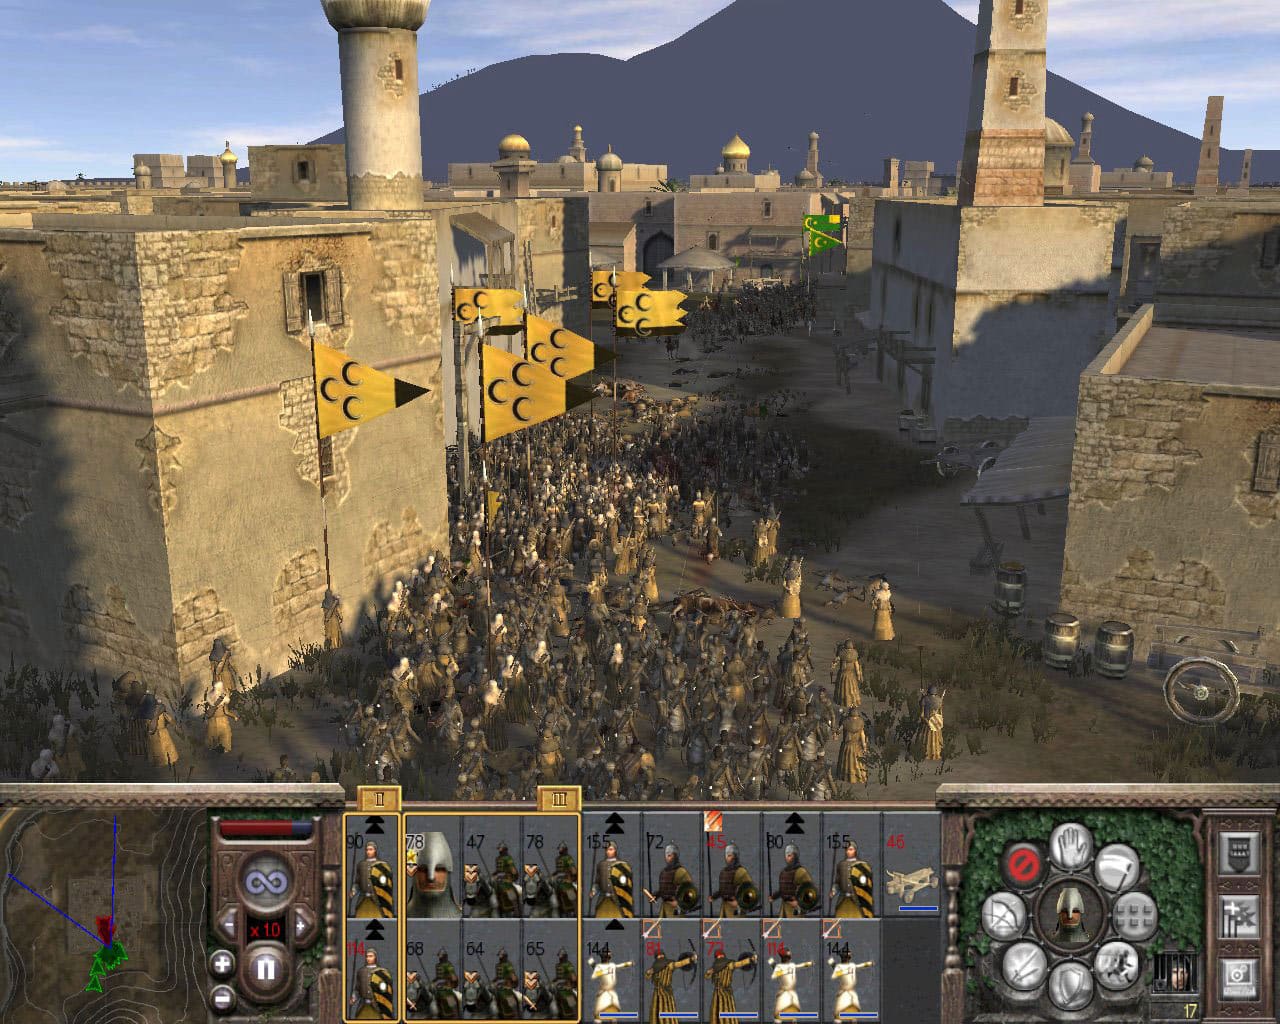 Total War: Medieval II player count stats